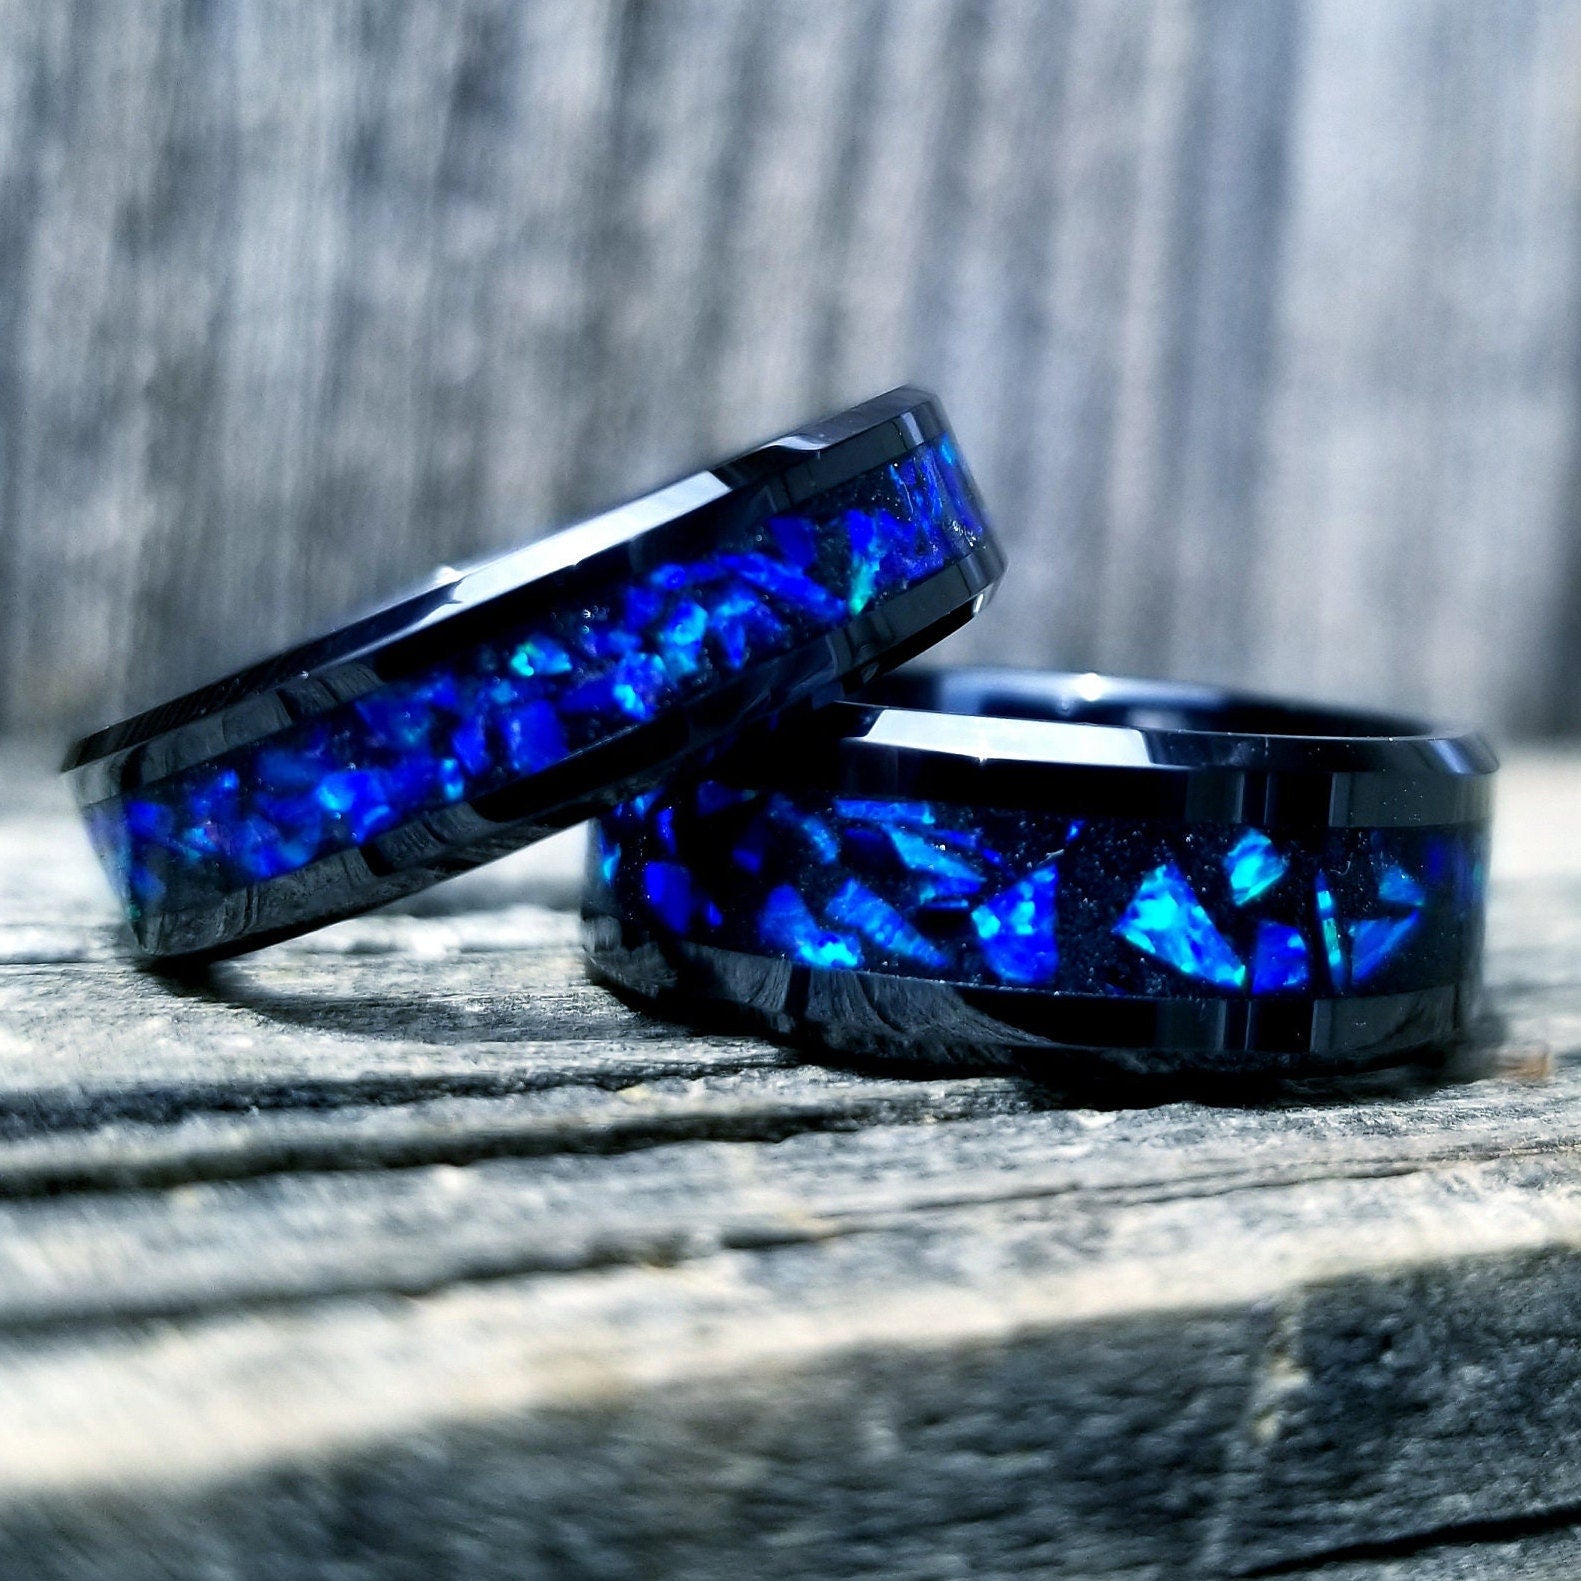 His & Hers Wedding Ring Set- Black Ceramic Ring Set with Violet Fire Opal & Glowstone Inlay - 8mm & 6mm Rings - Sizes 5-13 - Orth Custom Rings